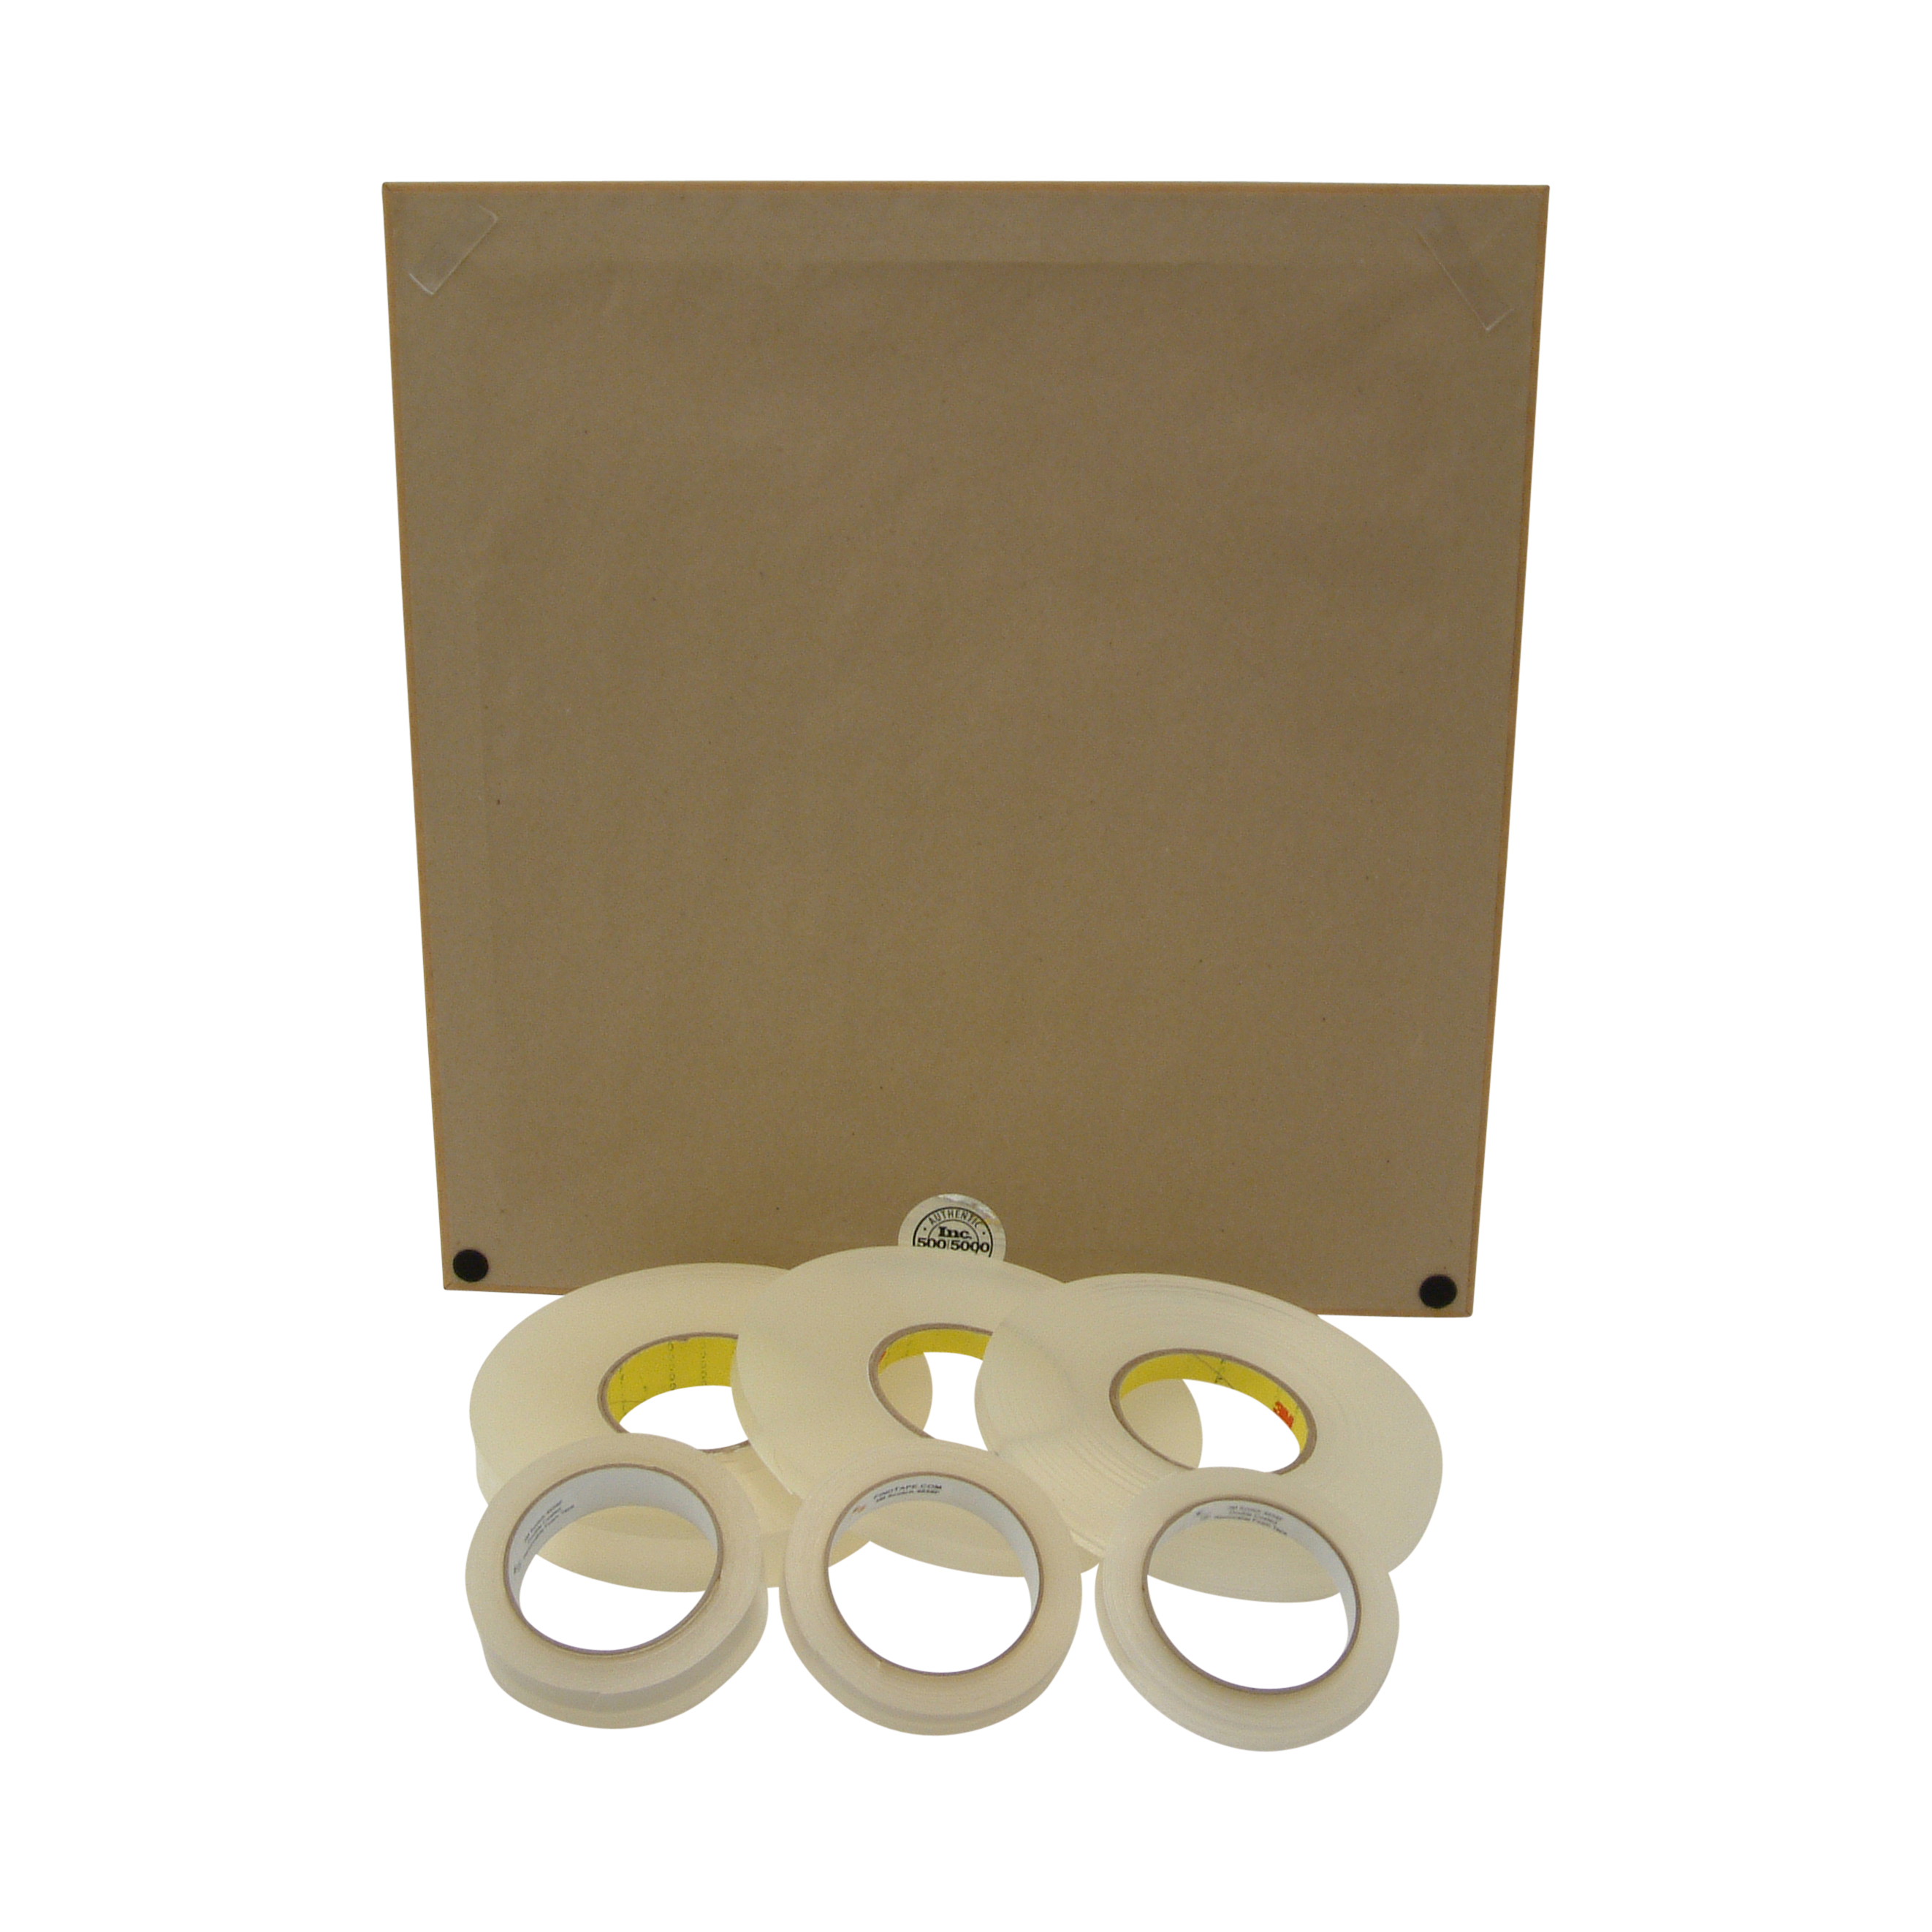 3M 4658F Double-Sided Removable Foam Tape